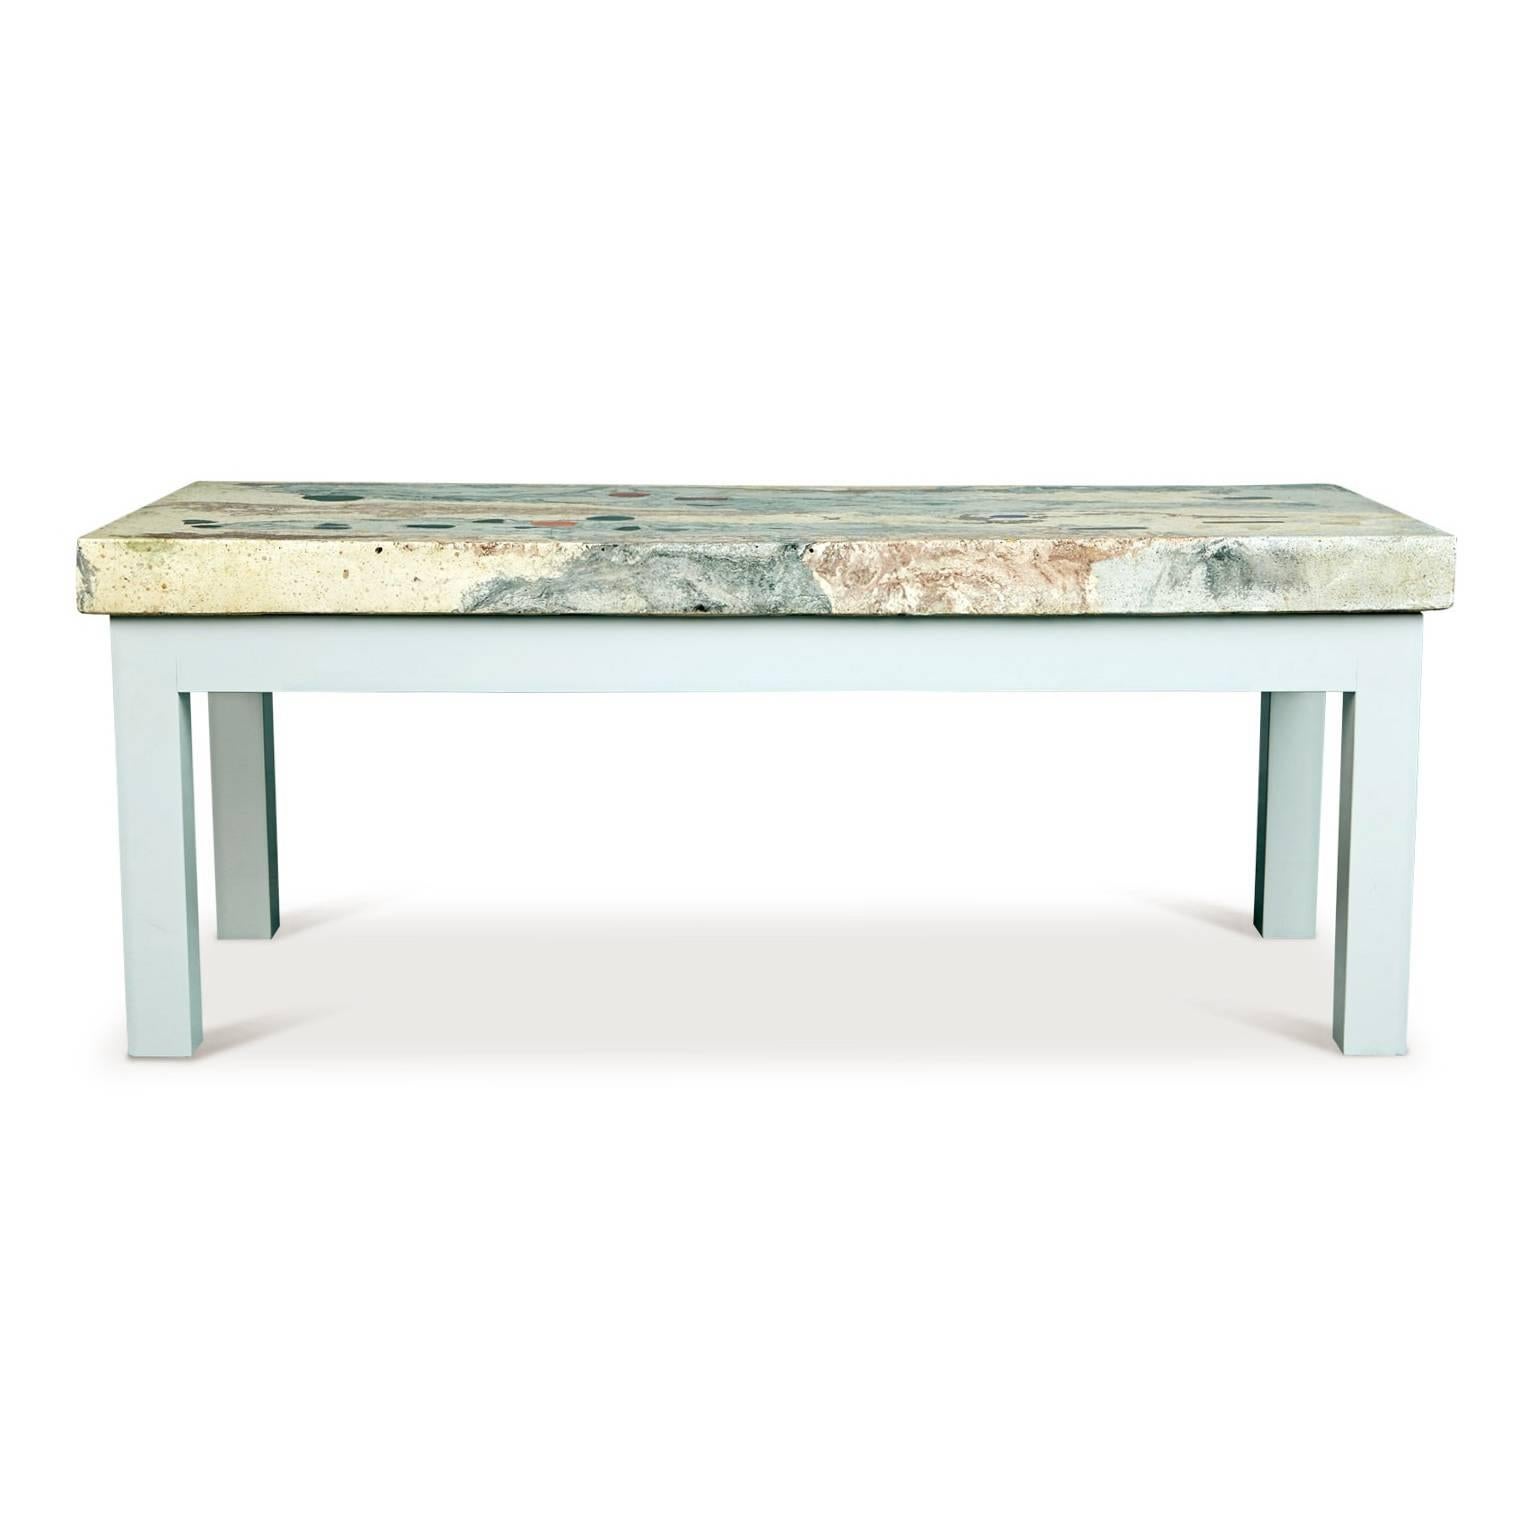 Uniquely crafted Post-Modern Italian coffee table, cocktail or tea table, or large side table. This eye-catching table features a beautiful cast concrete top that has been painted with swirling clouds of marbleized color to give this concrete the